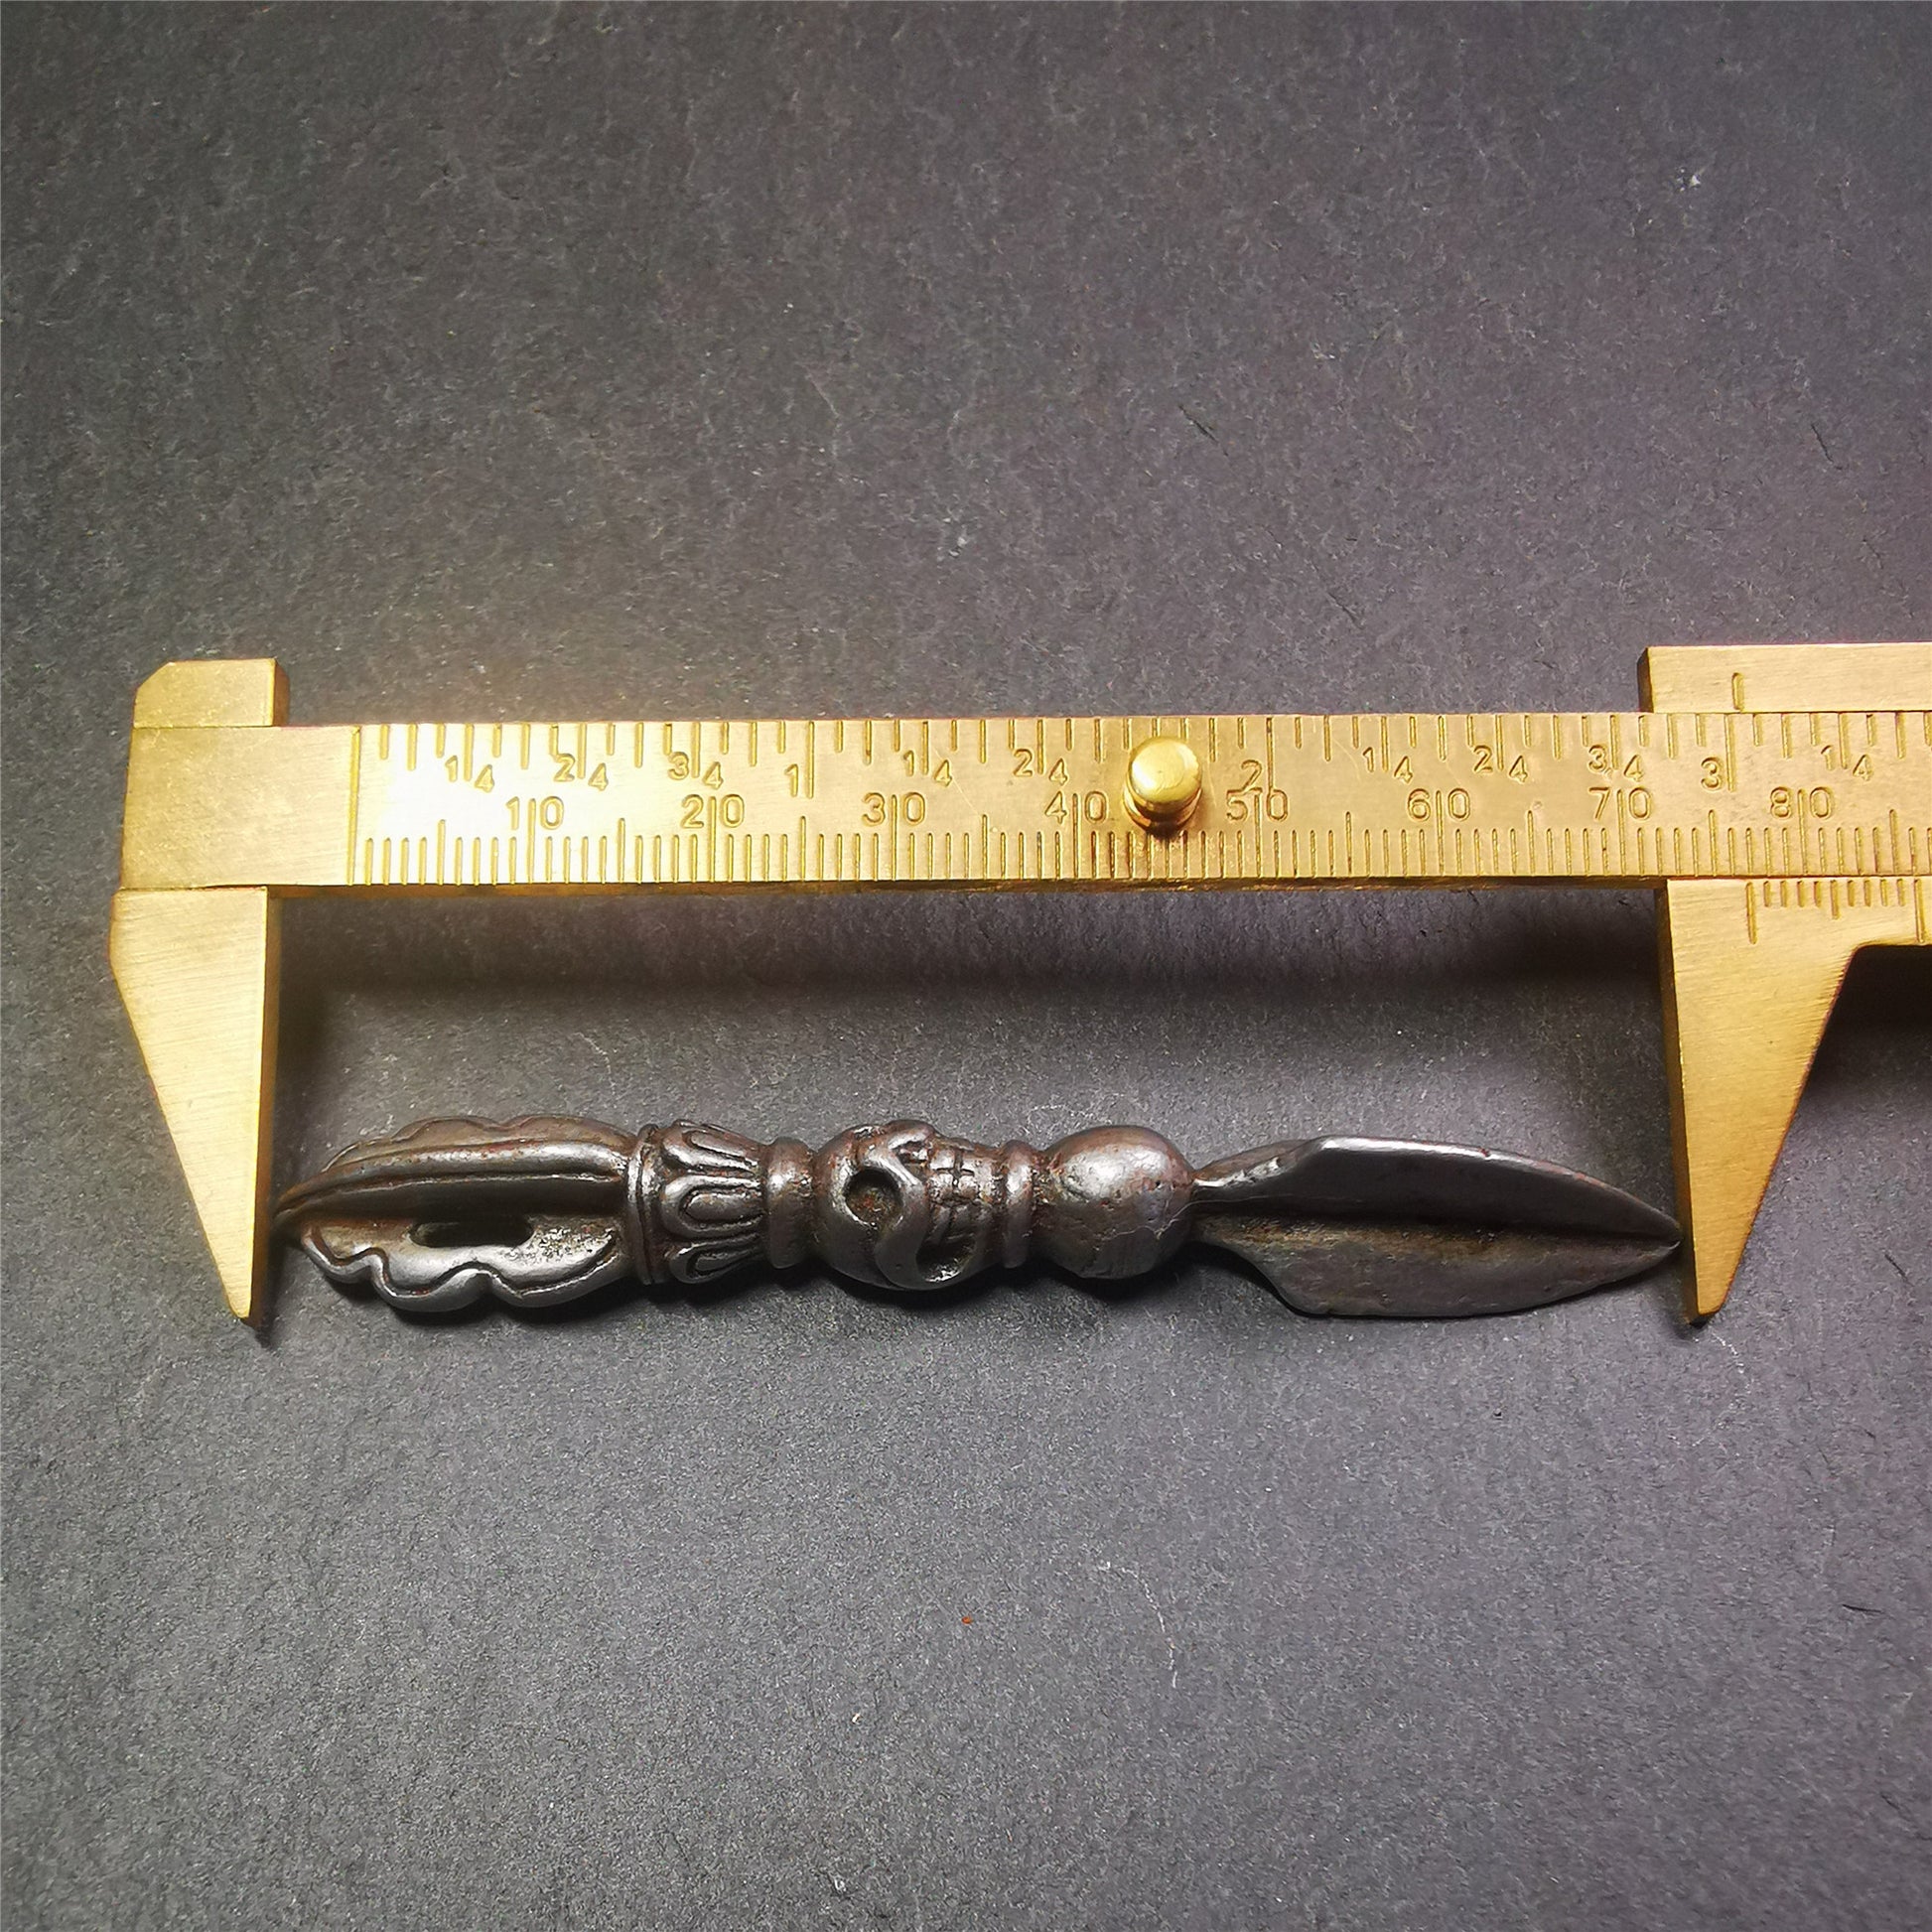 This phurba amulet was made of cold iron by Tibetan craftsmen in 1990's,its upper part is a vajra,and carved Shmashana Adhipati skull in the middle, the lower part is a Dorje Phurba,length is 3.0inches